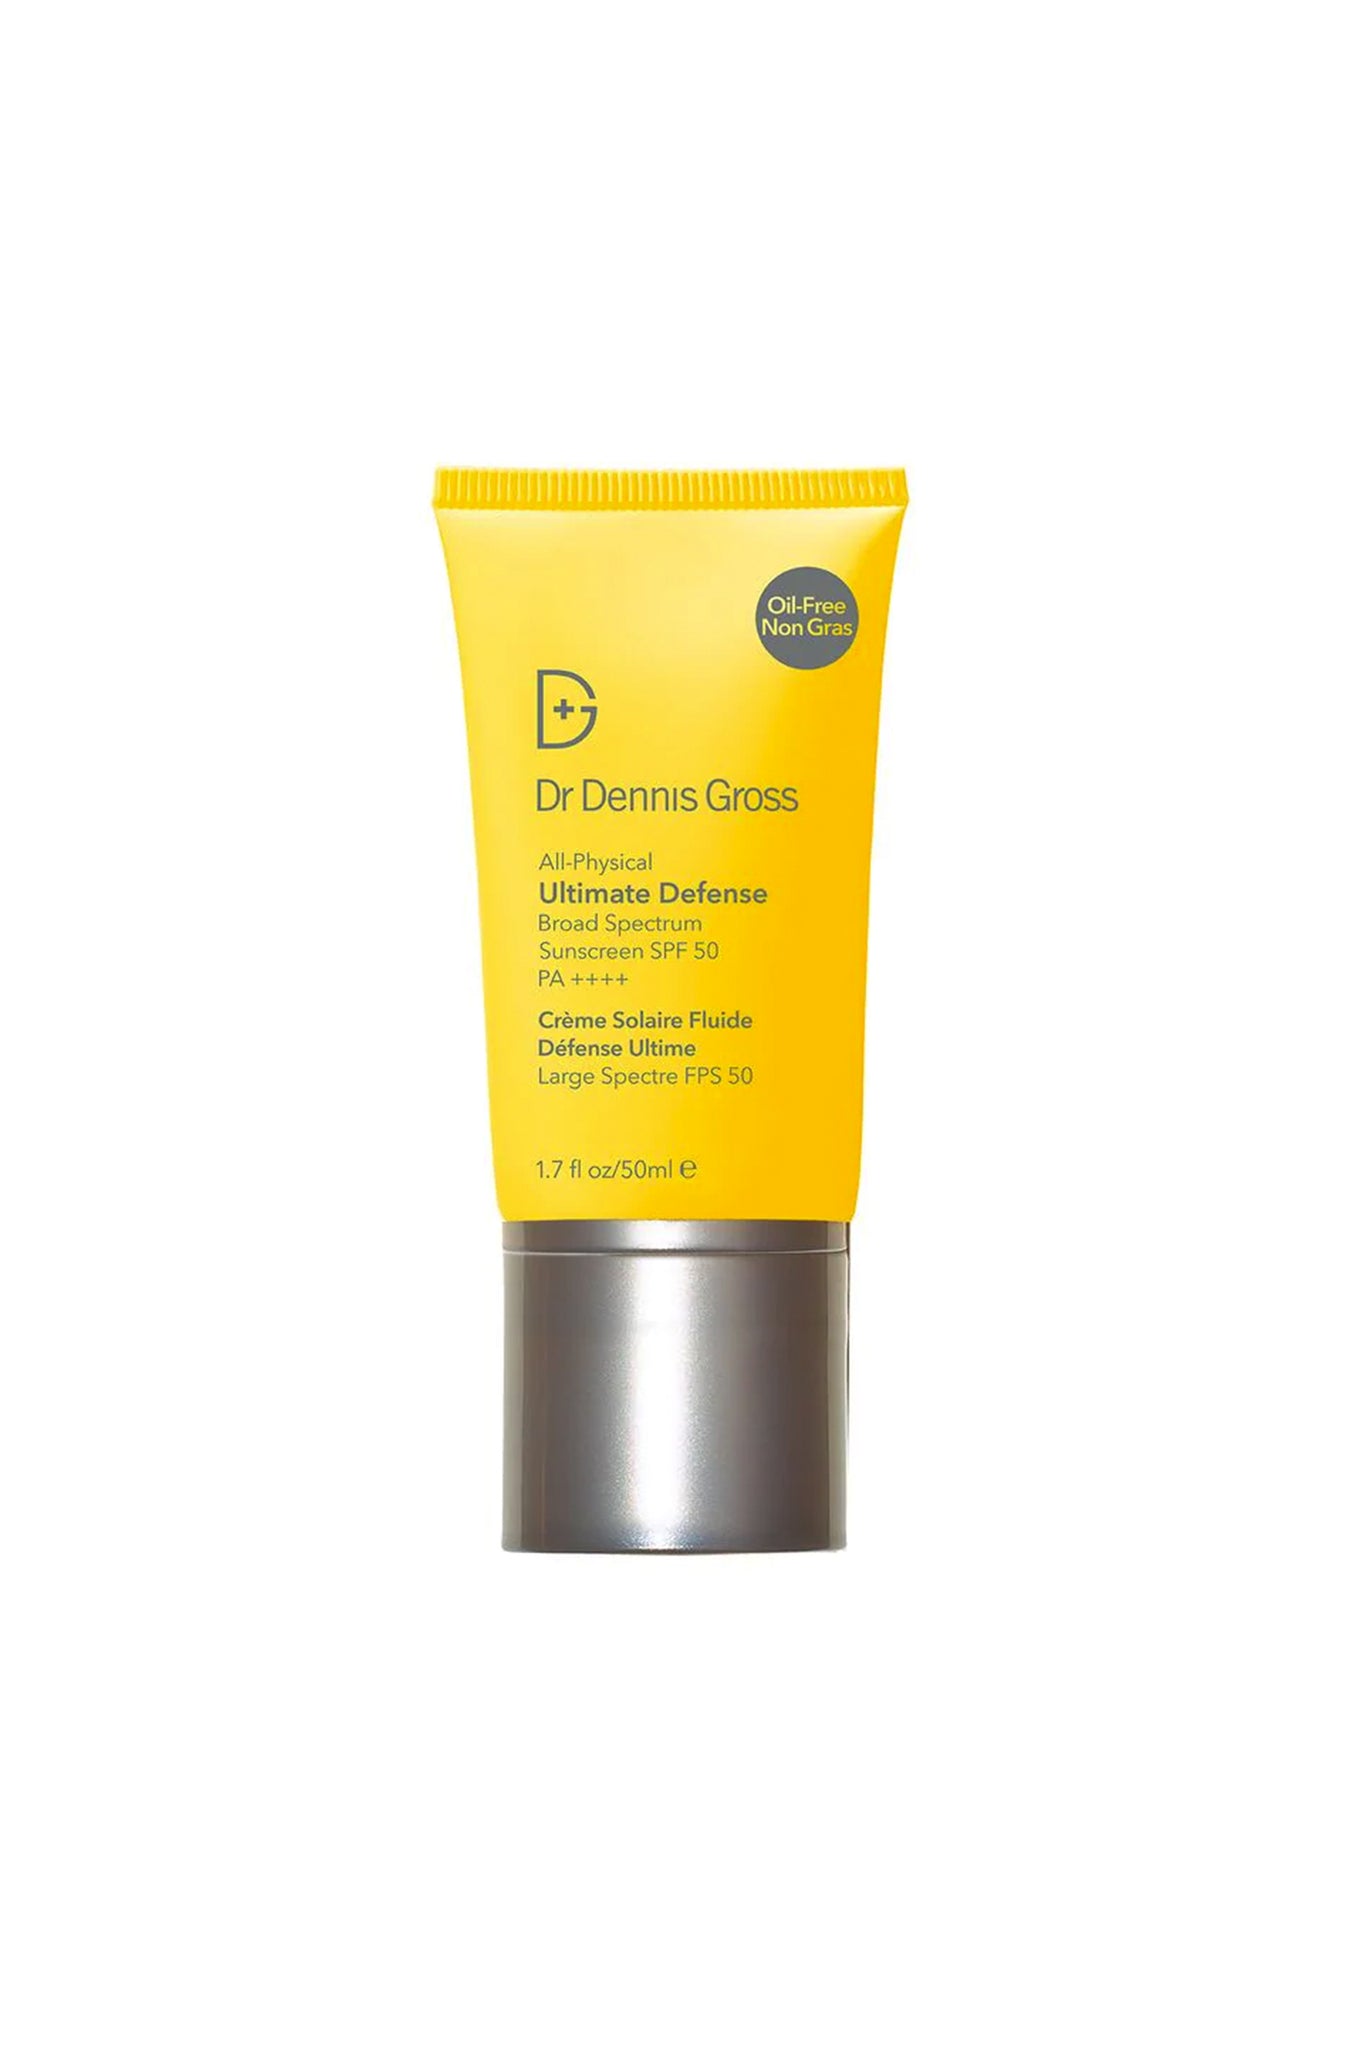 All Physical Ultimate Defense Broad Spectrum Sunscreen SPF 50